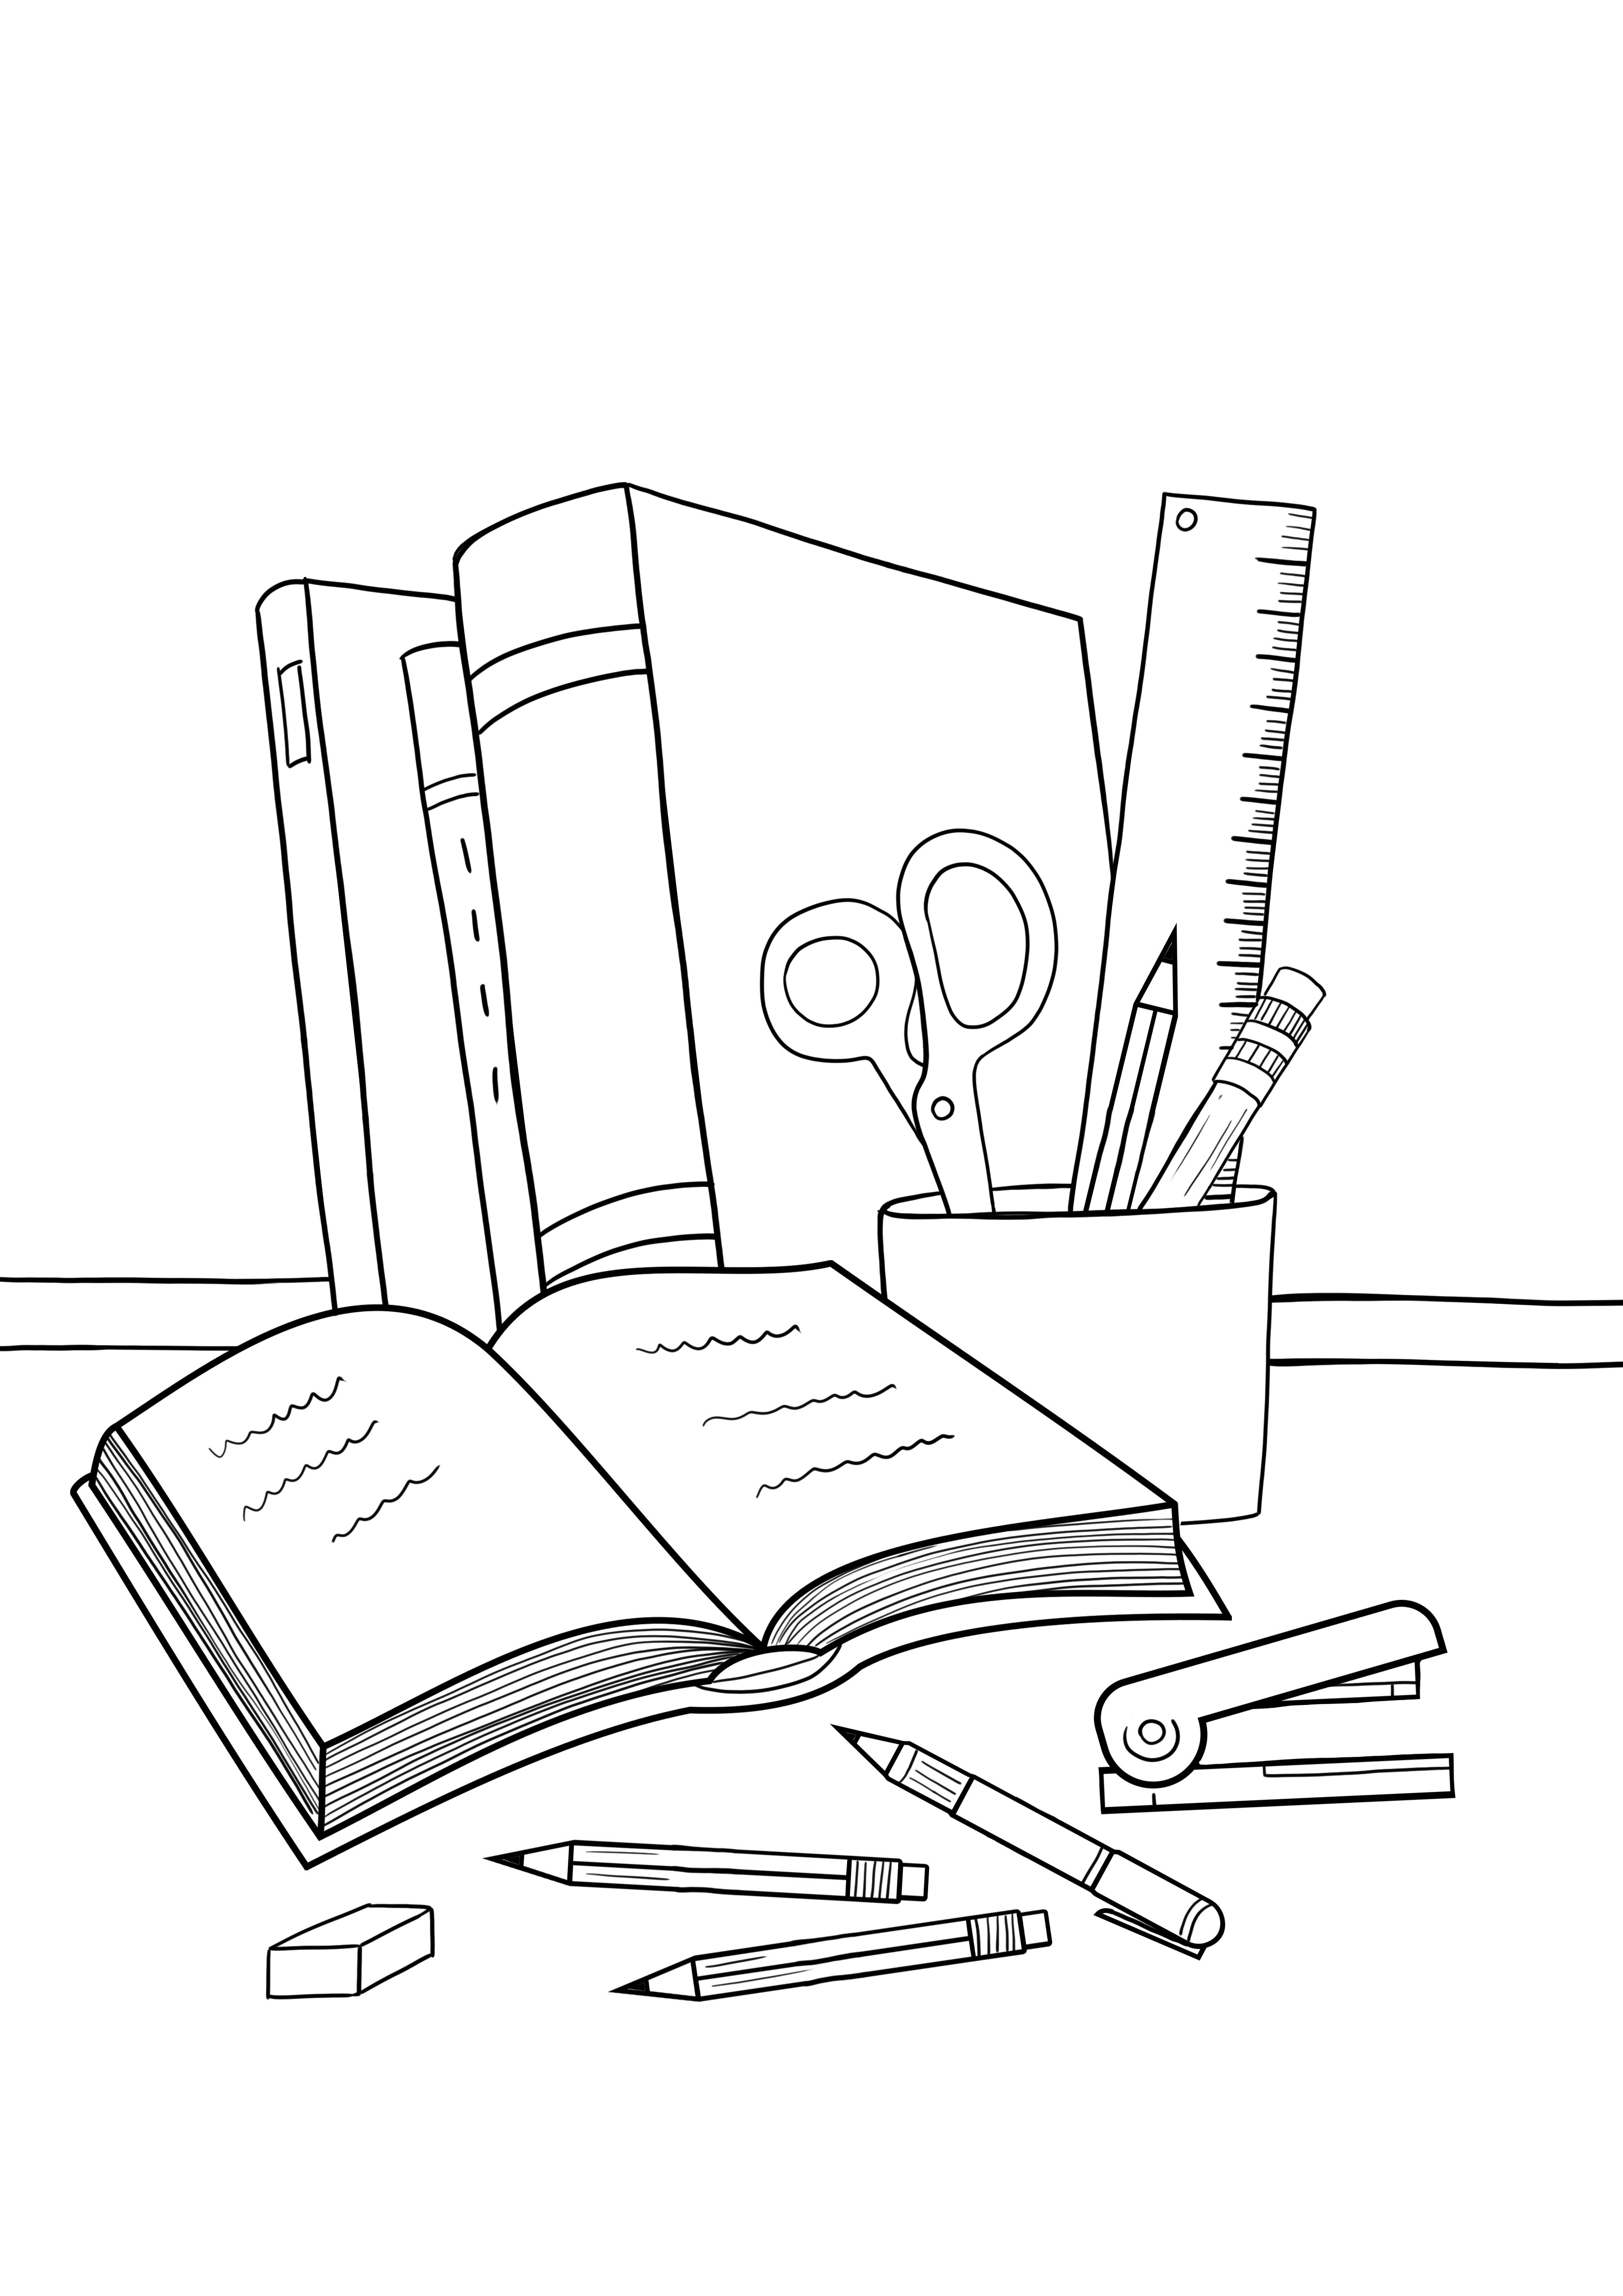 Coloring Pages School Supplies